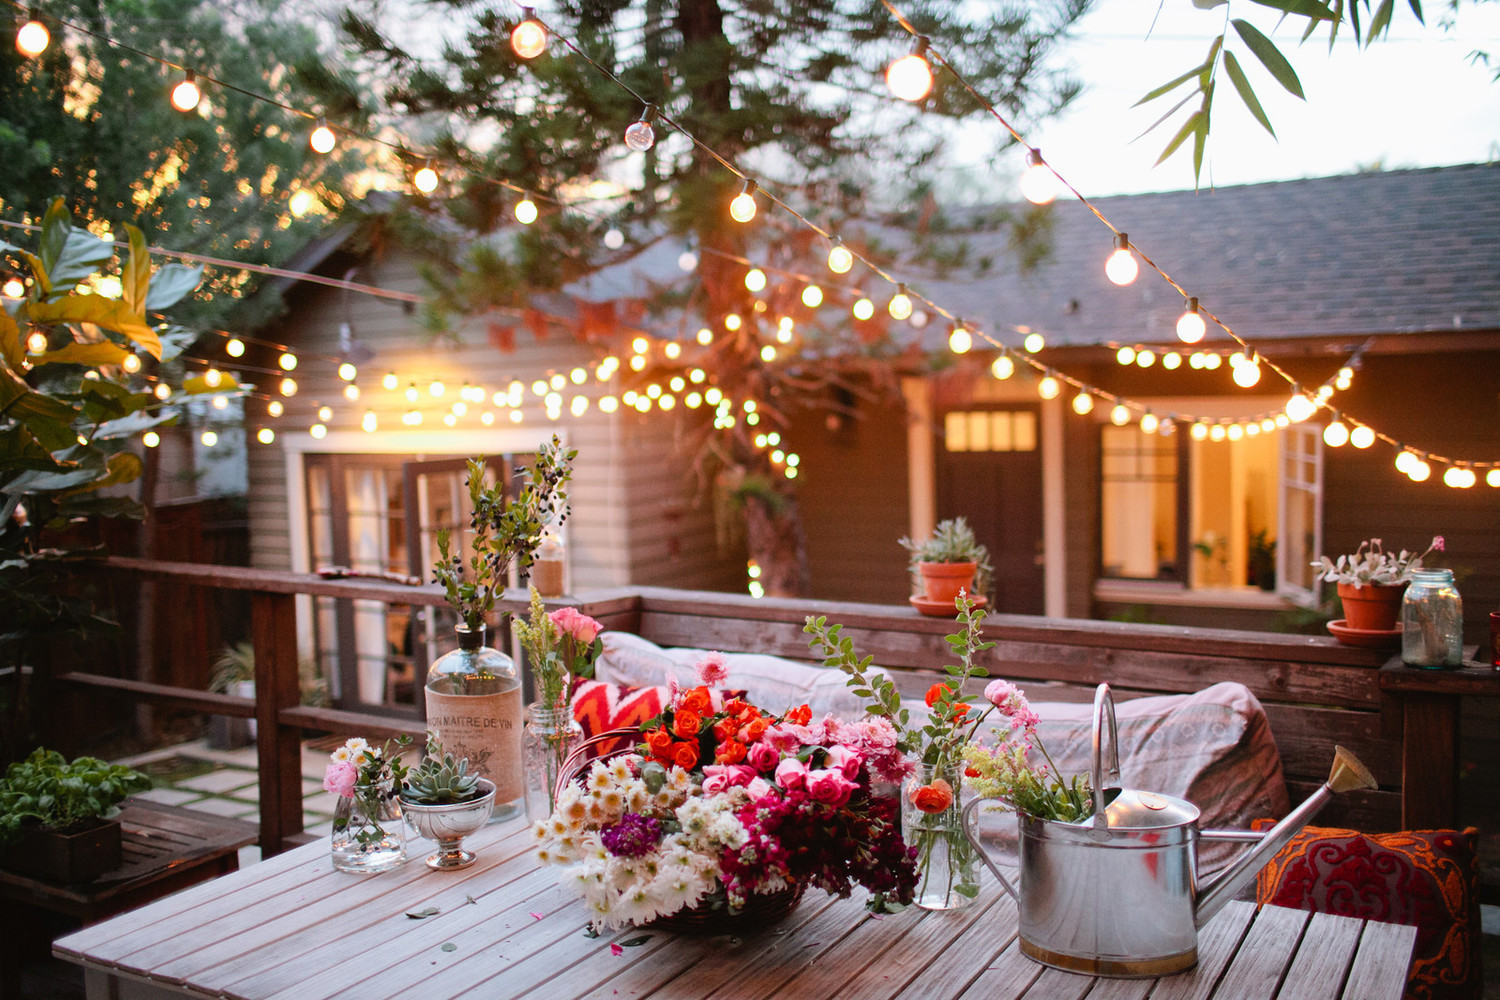 Lighting Ideas For Backyard Party
 A New Pergola on the Deck from Thrifty Decor Chick